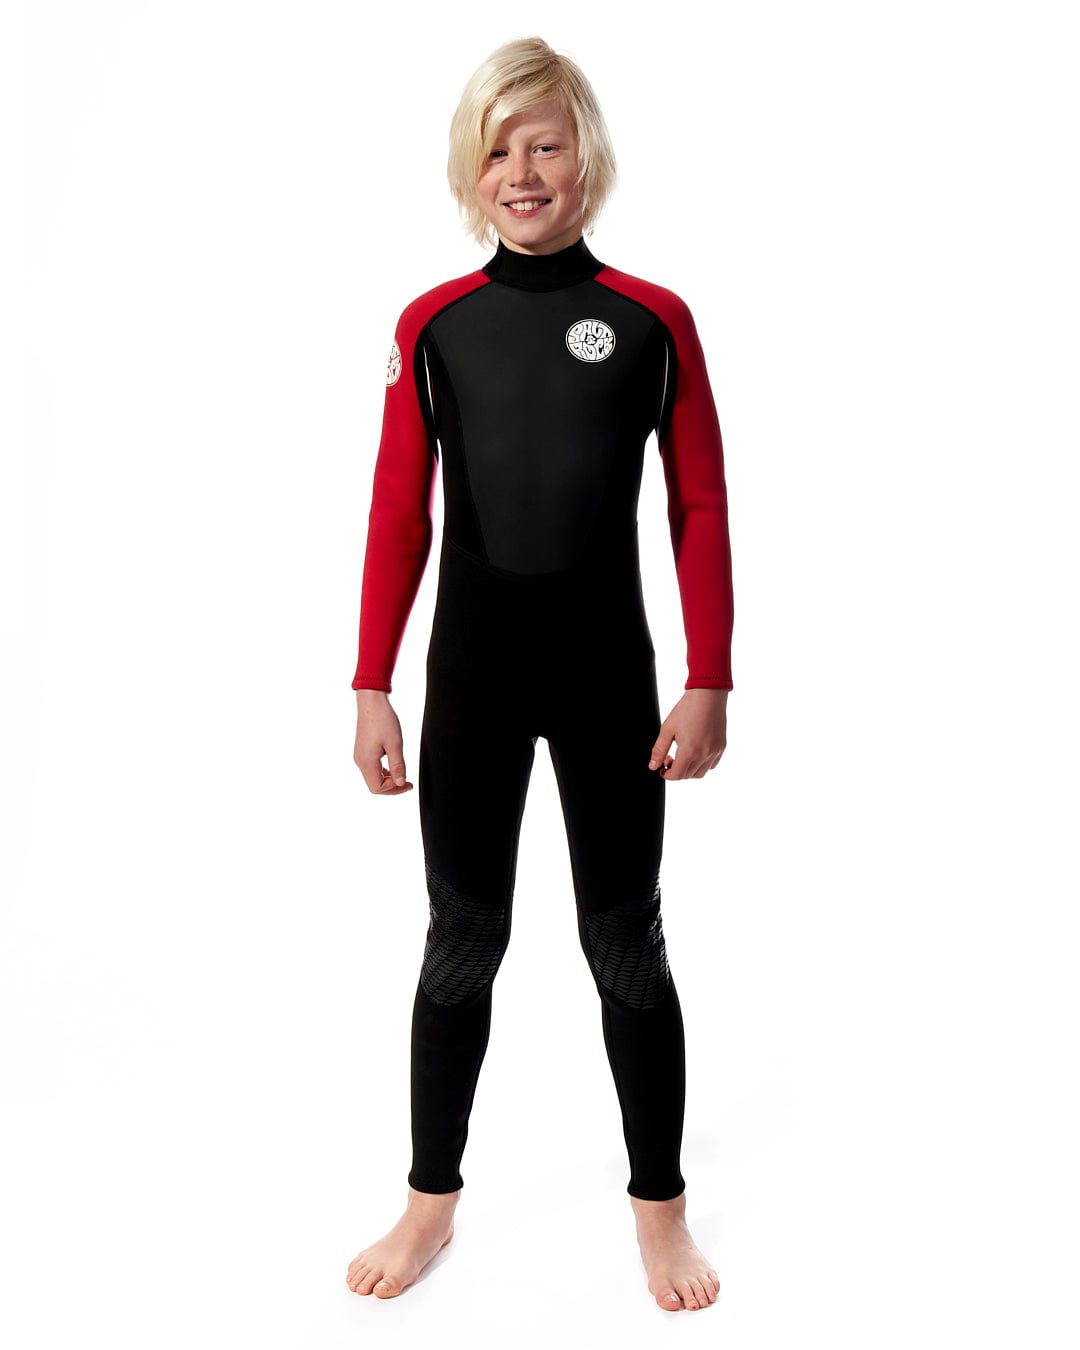 Core - Kids 3/2 Full Wetsuit - Red